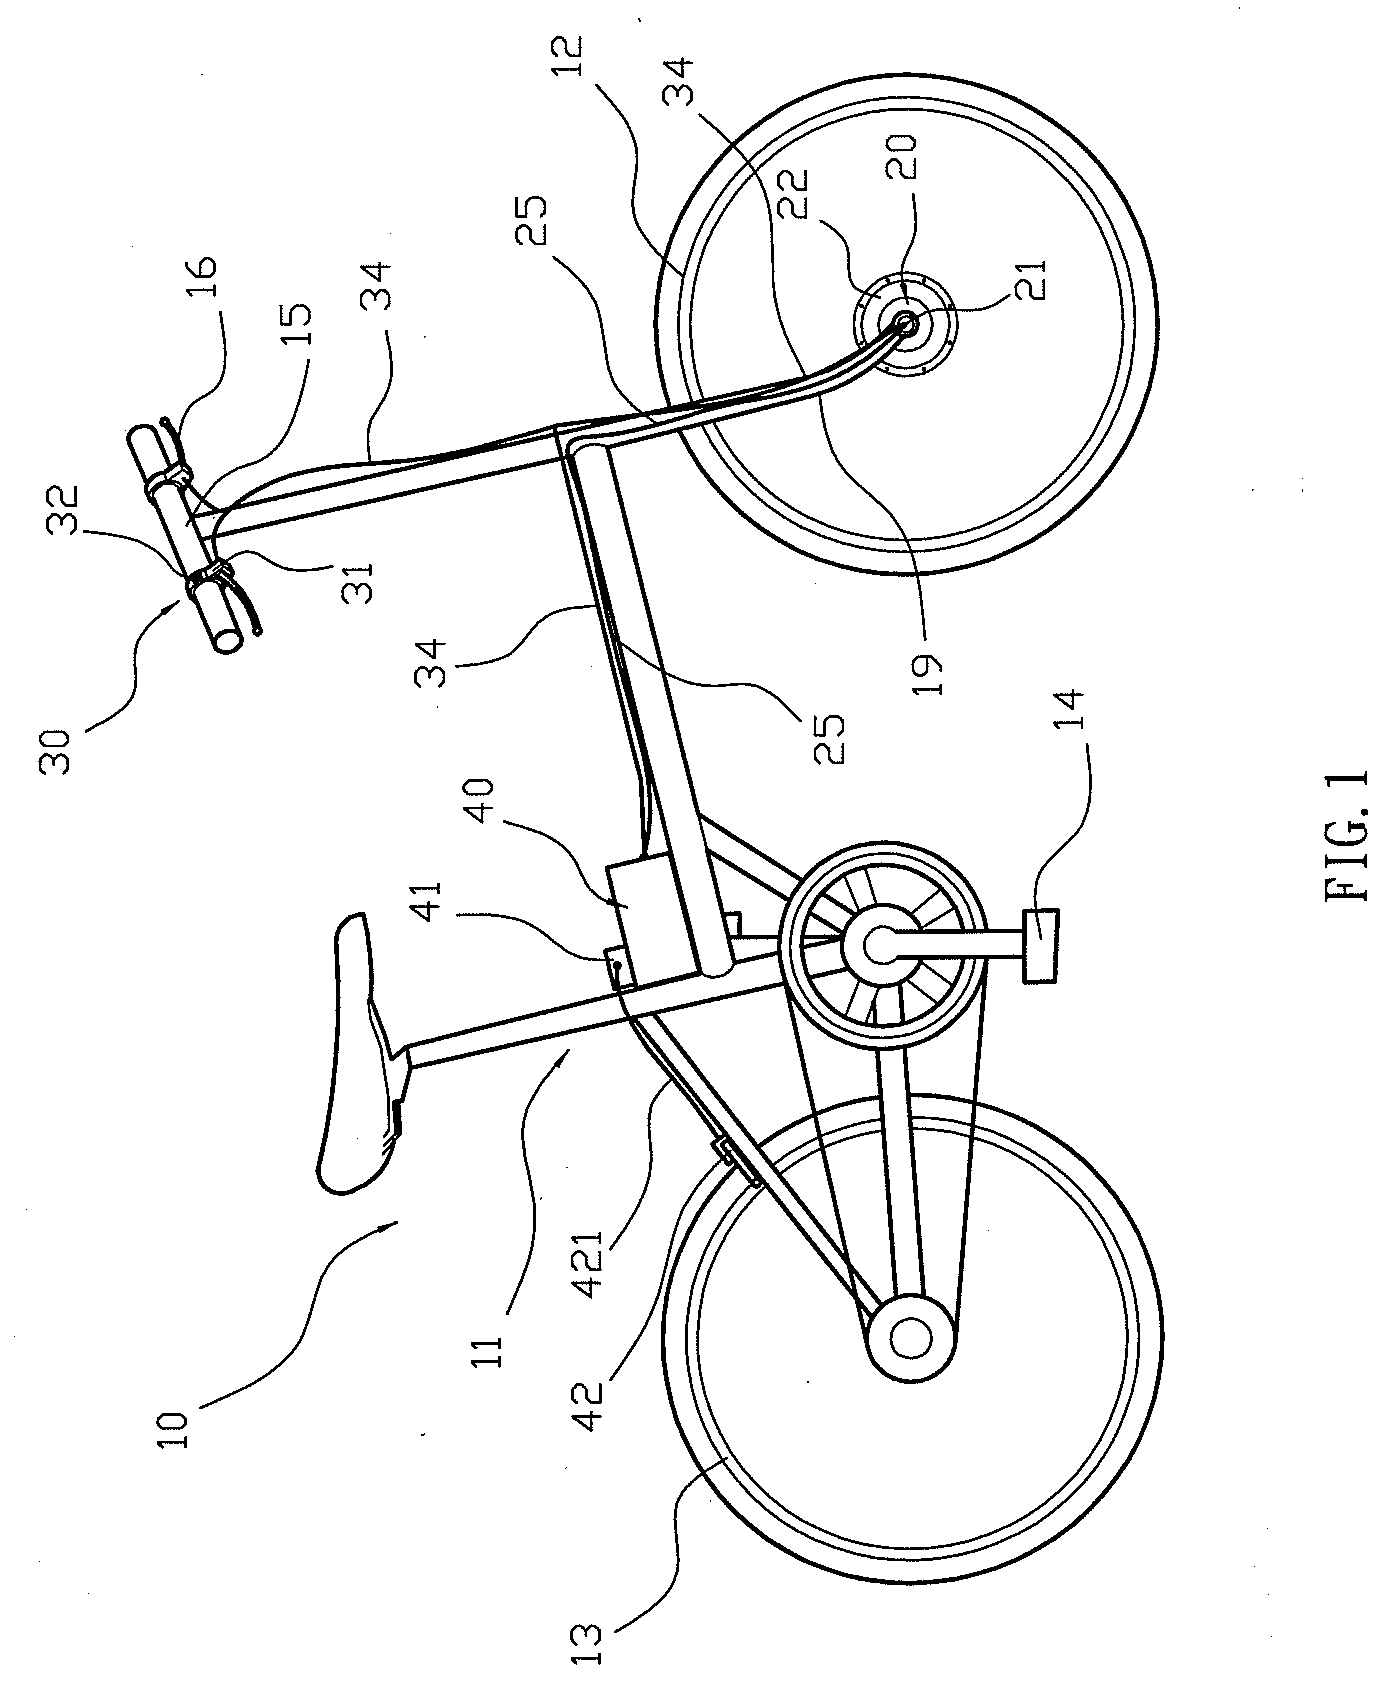 Motorized Bicycle with Electric Generating Function